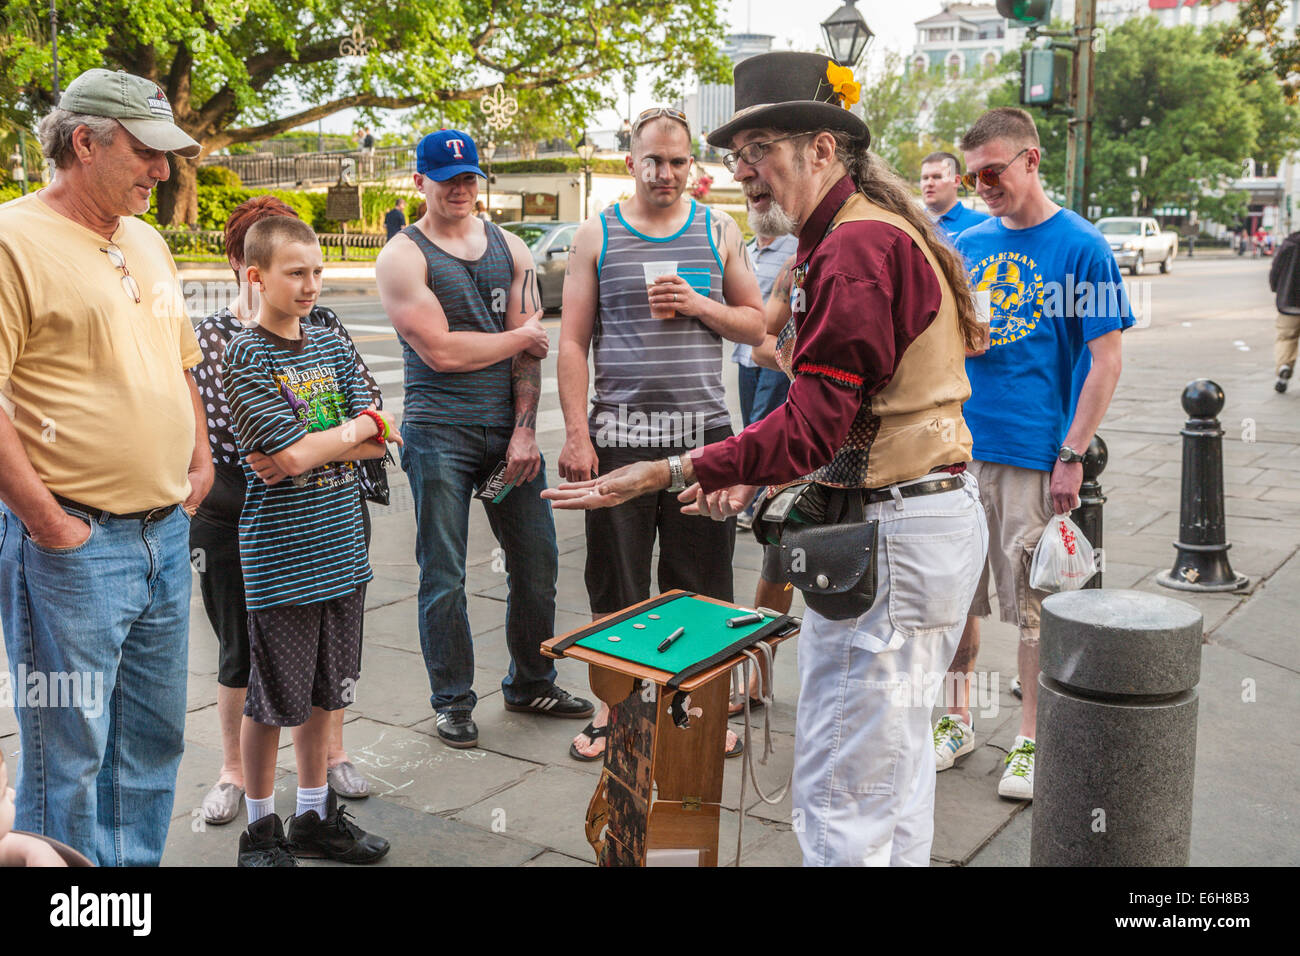 Street performer doing magic show for tourists in the French Quarter of New Orleans, Louisiana Stock Photo